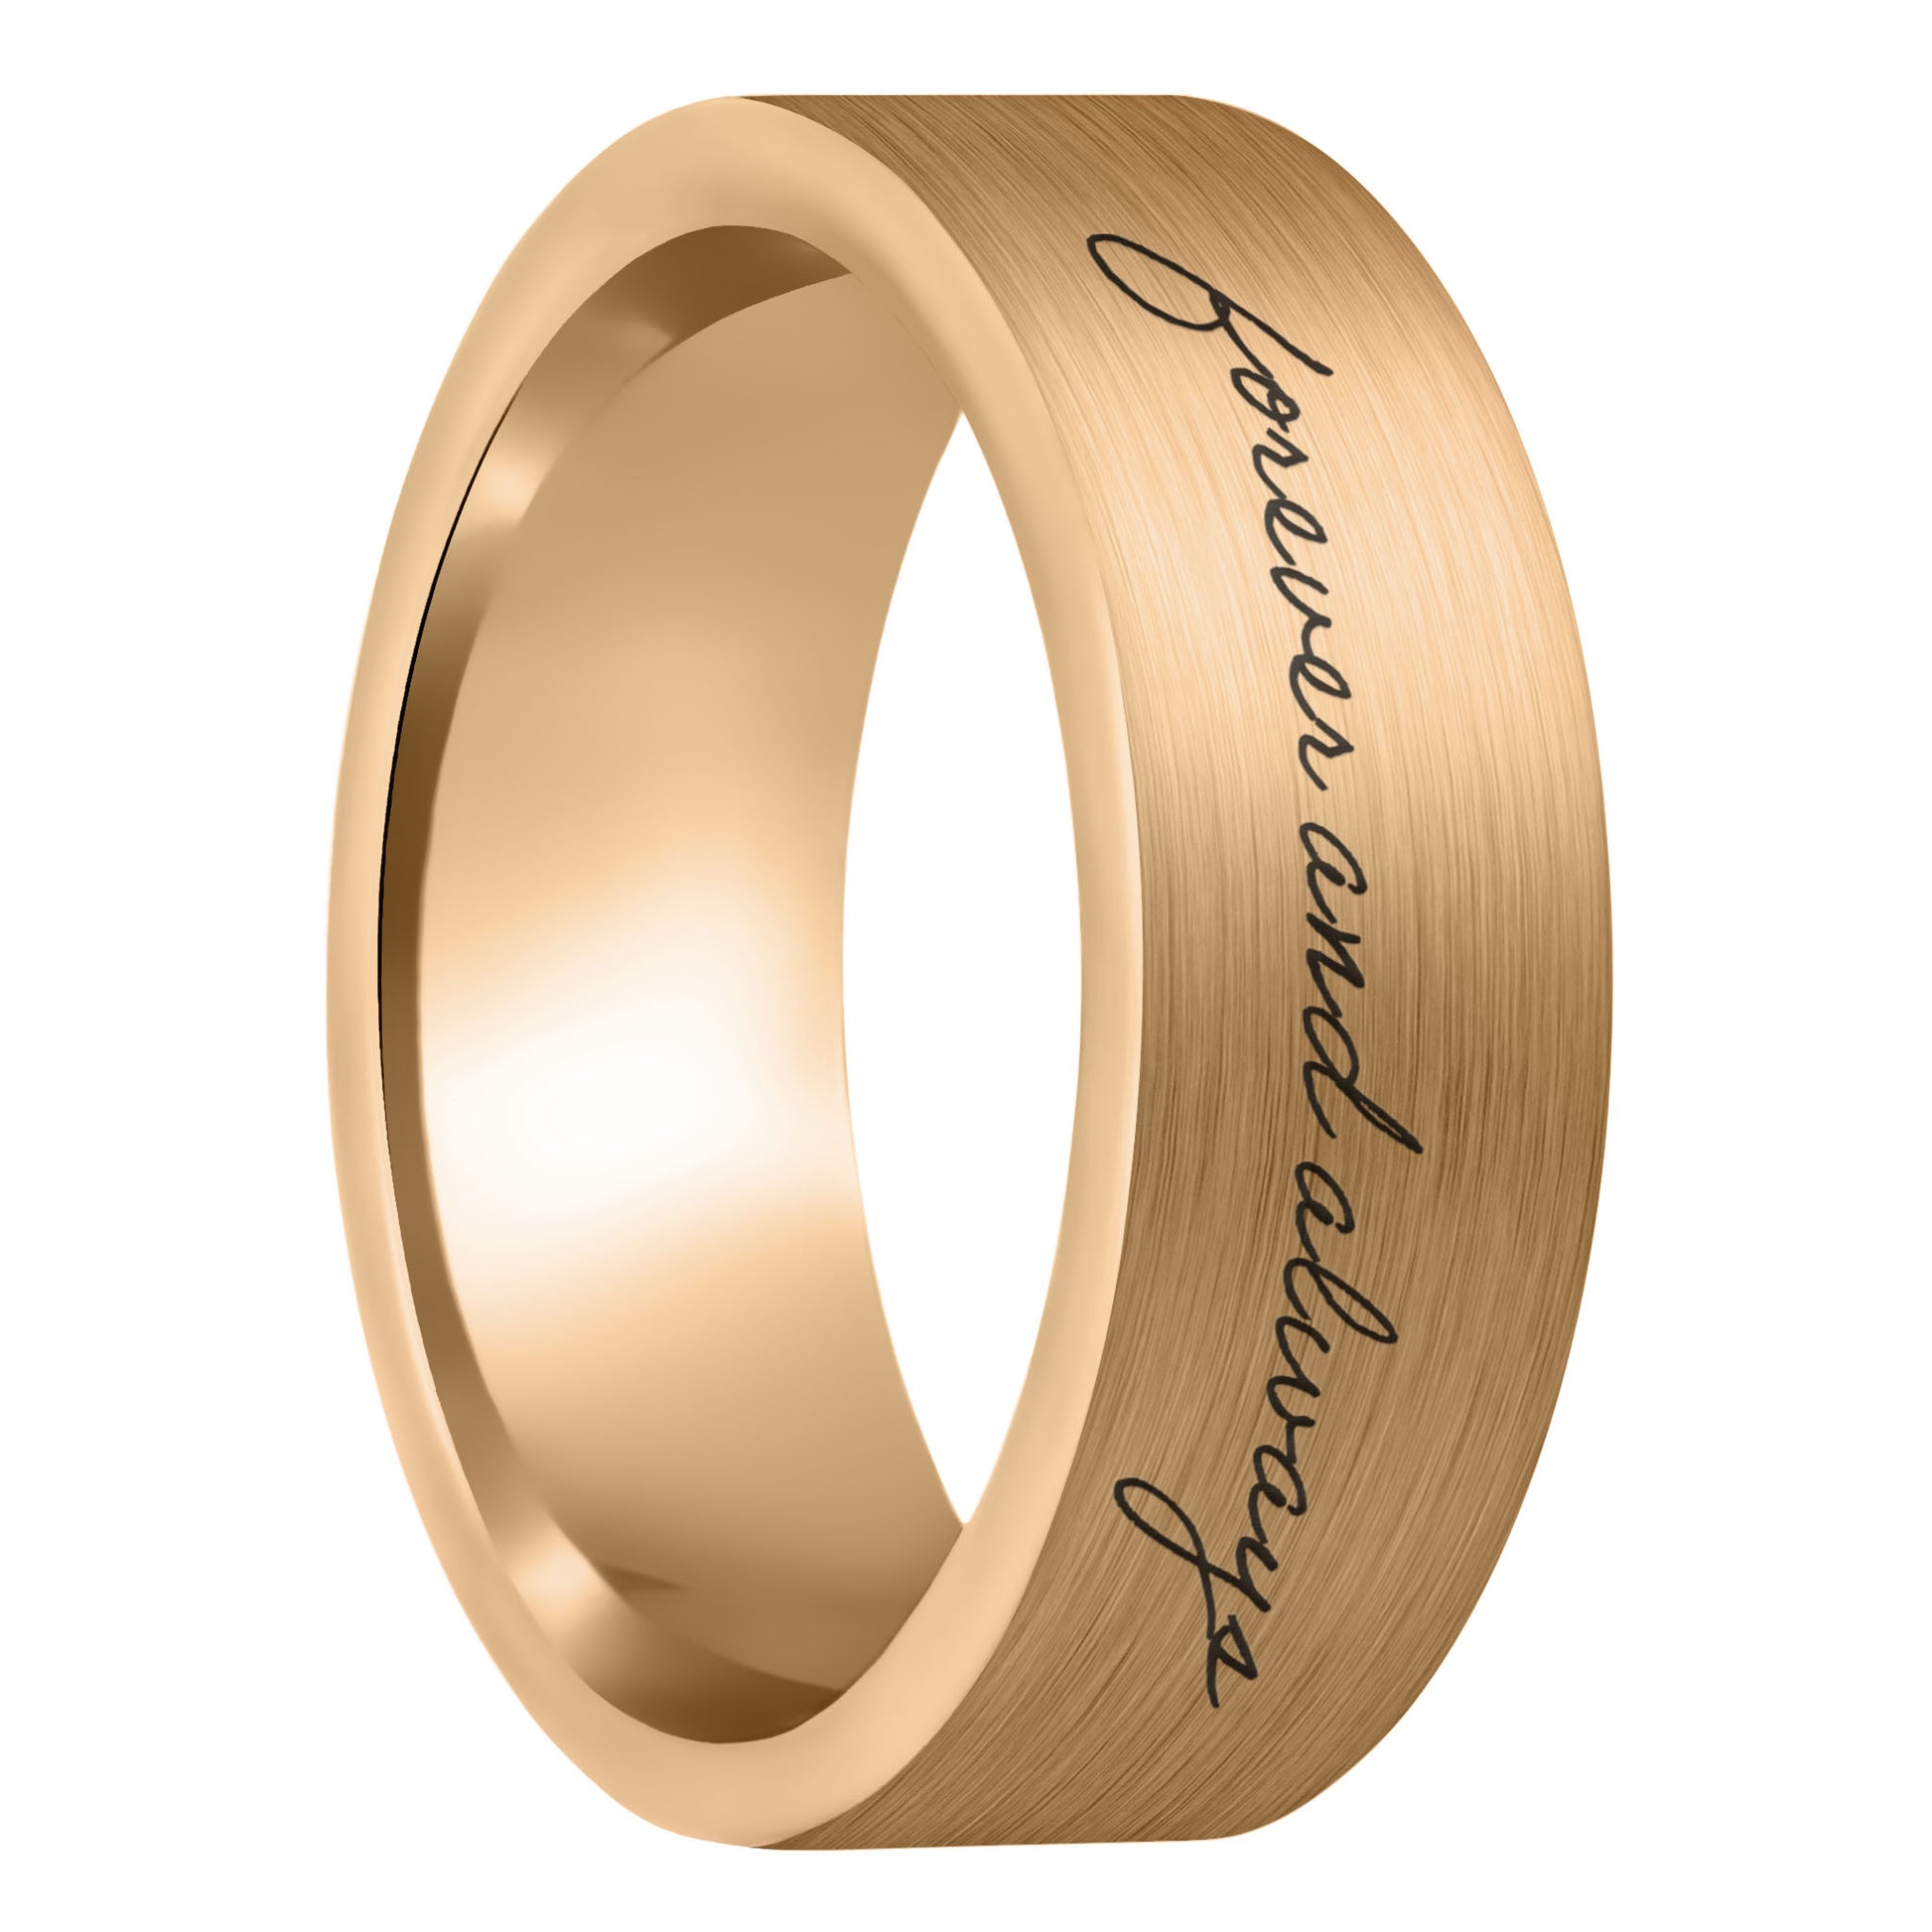 A custom handwriting brushed rose gold tungsten men's wedding band displayed on a plain white background.